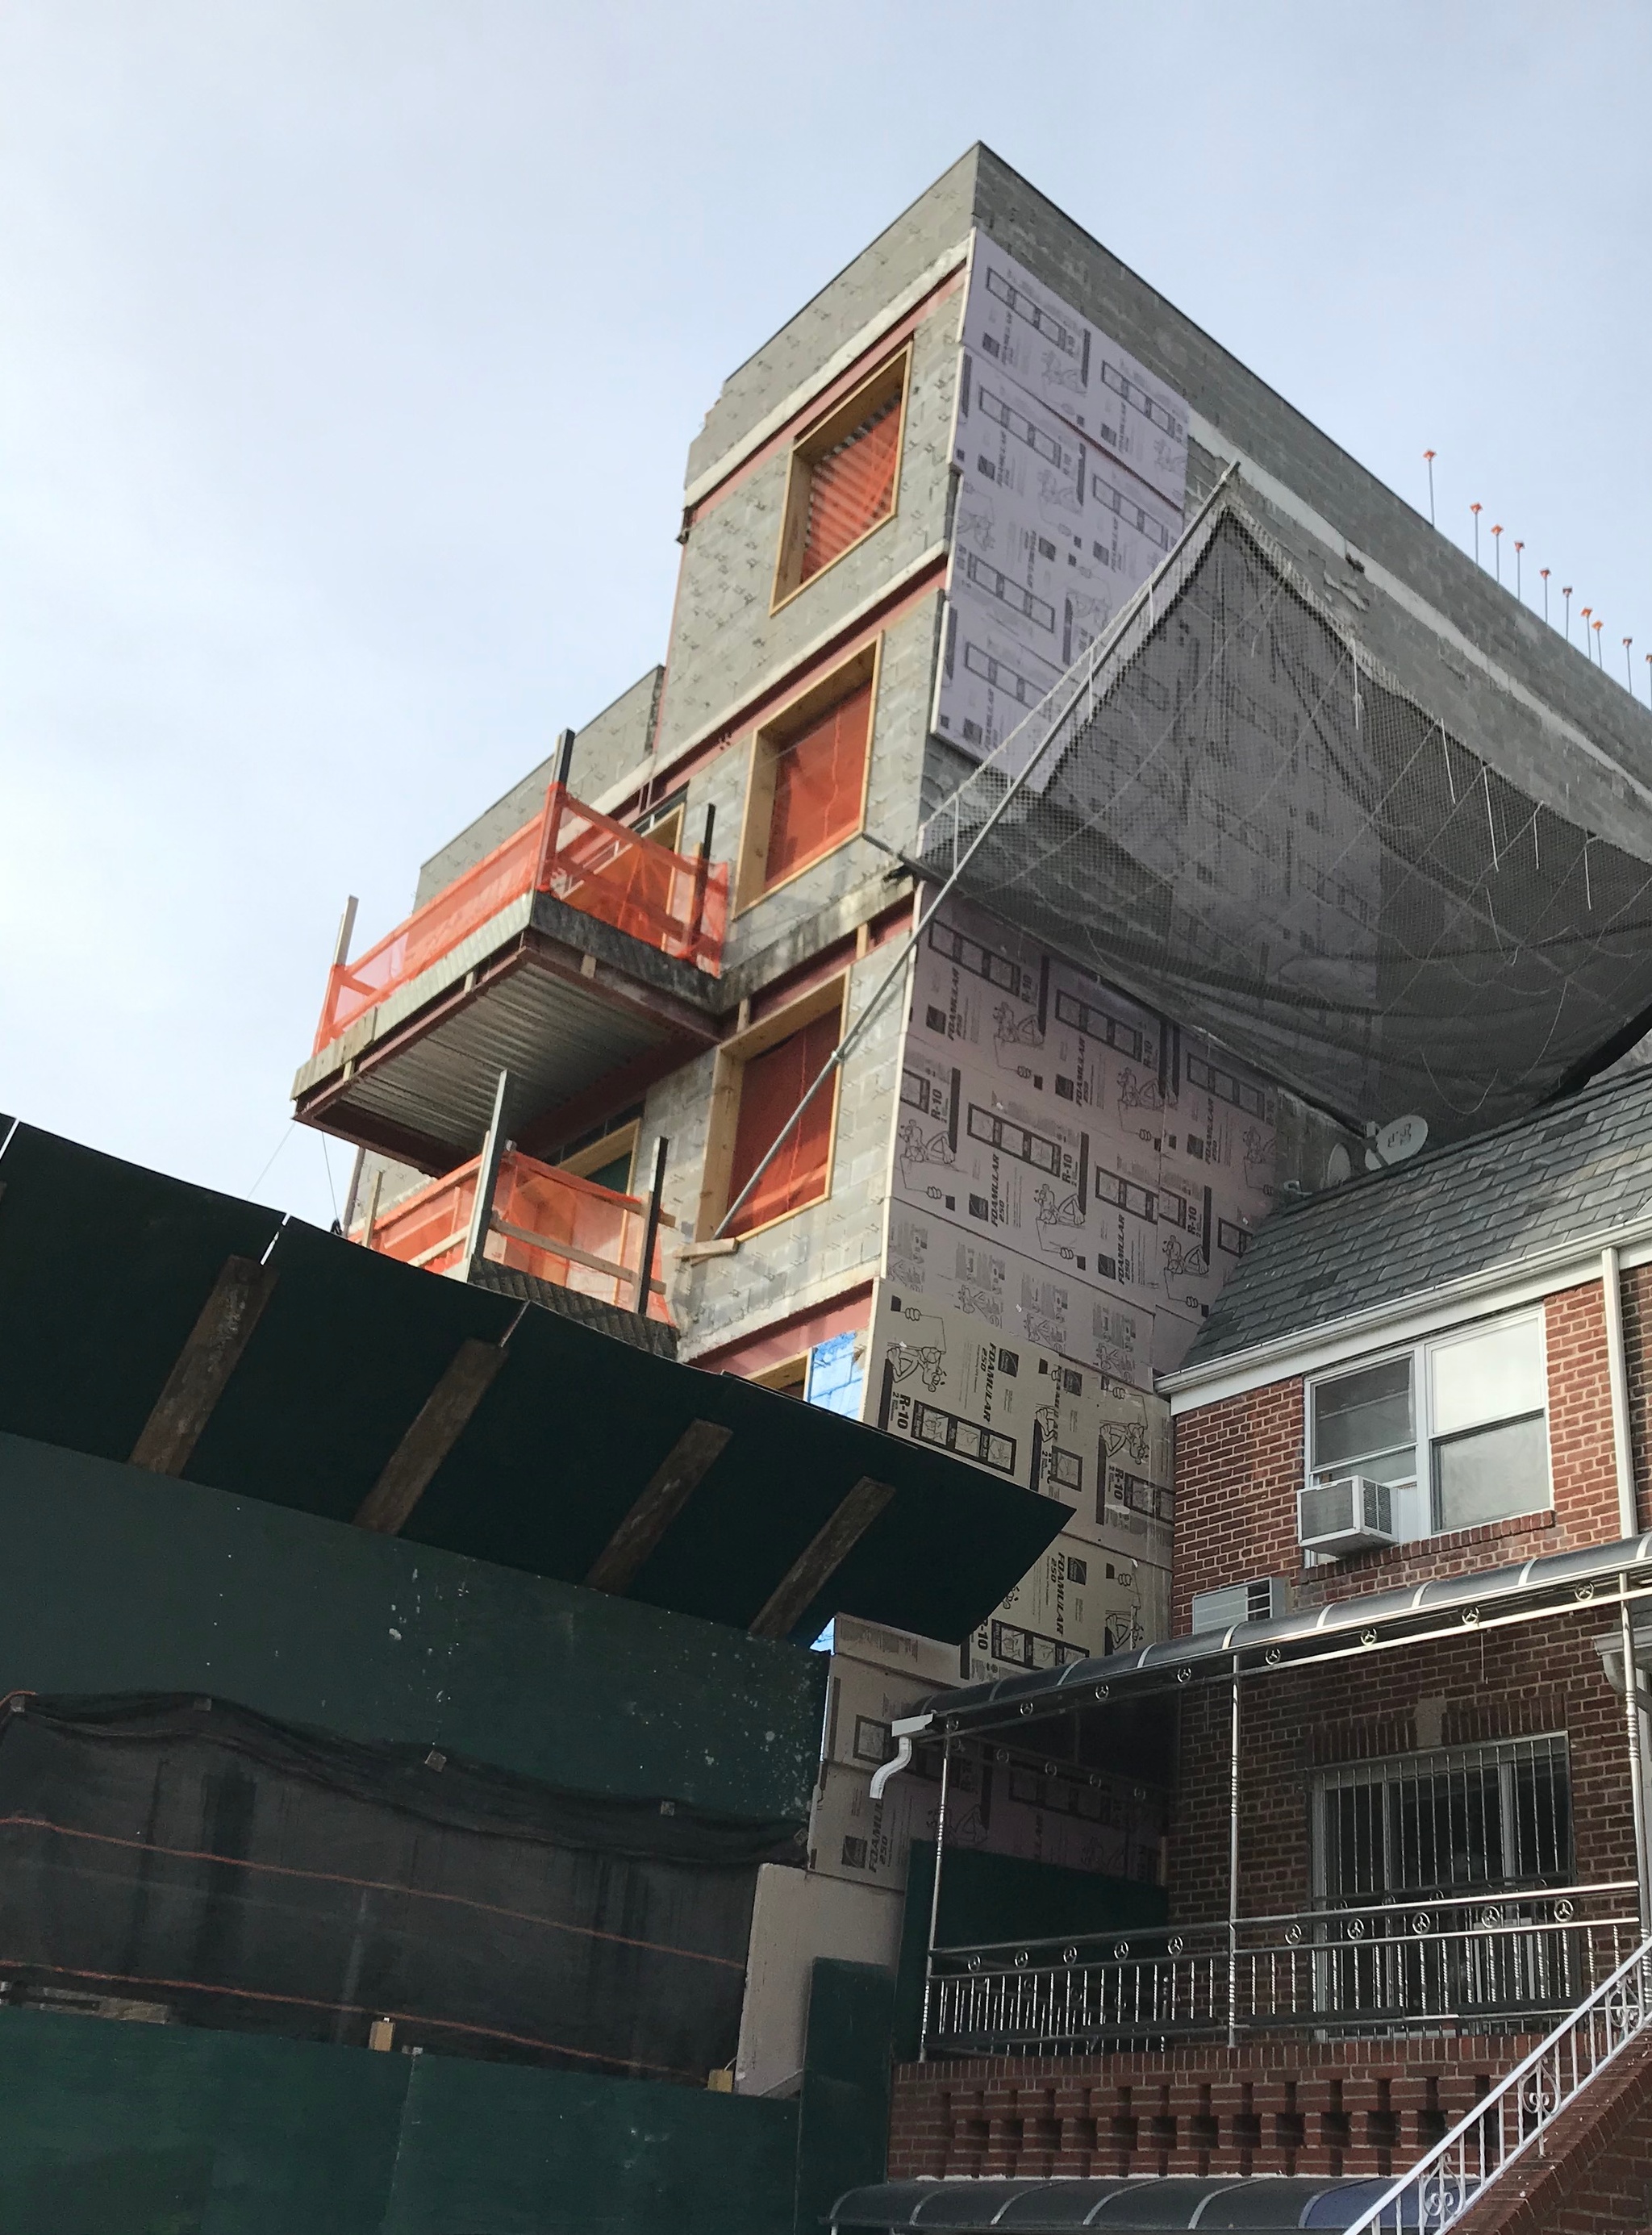 A five-story apartment building under construction. It has unfinished concrete walls and orange plastic netting encloses the spaces where windows and balconies will be. To its right, a smaller two-story brick house sits beside it. The house has steel railings along its front porch. 